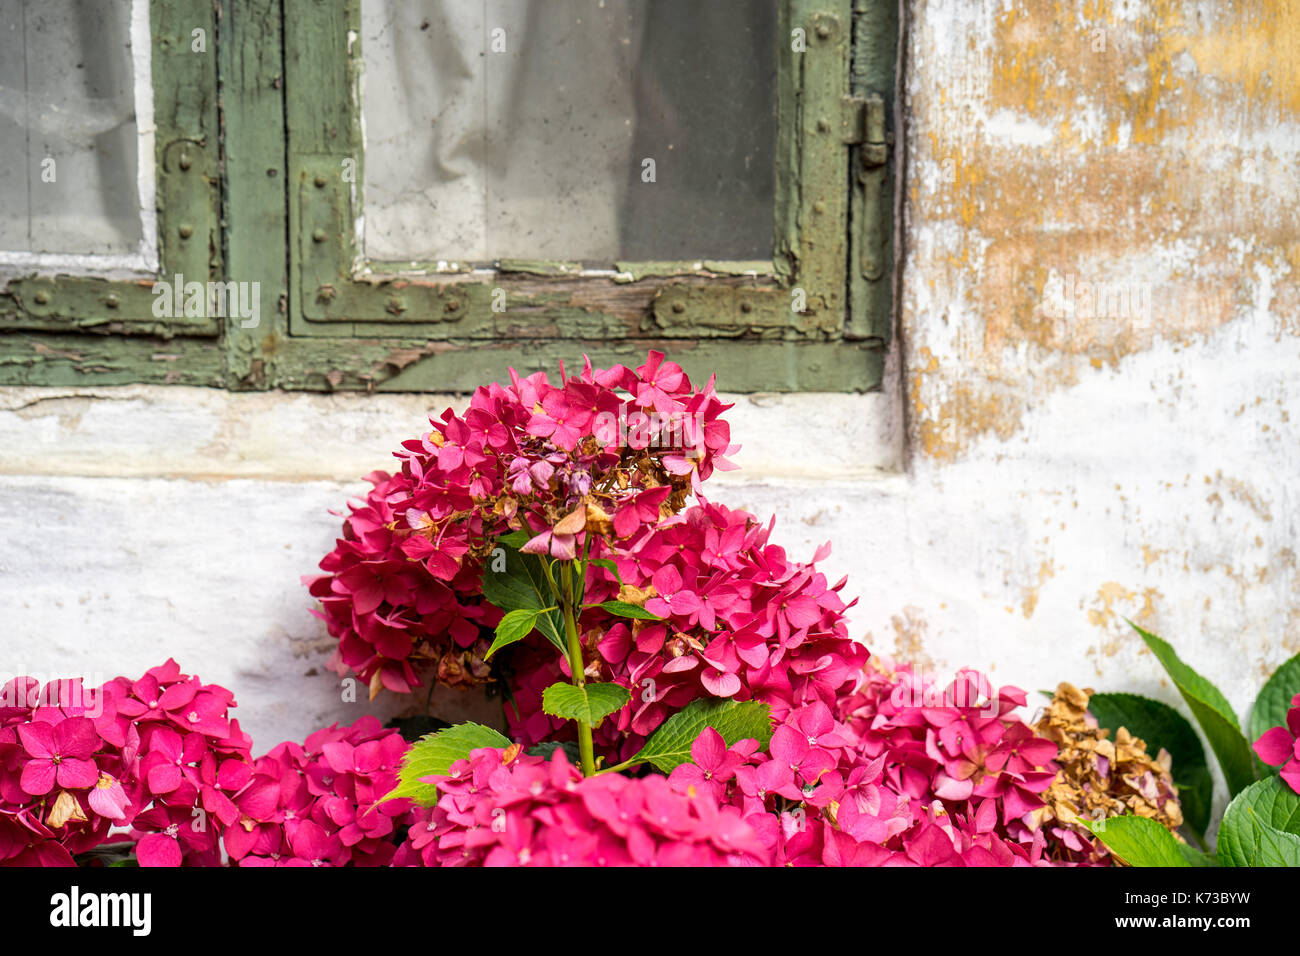 Hydrangea in splendid red bloom, growing up in front of old building with green cracked painted window Stock Photo